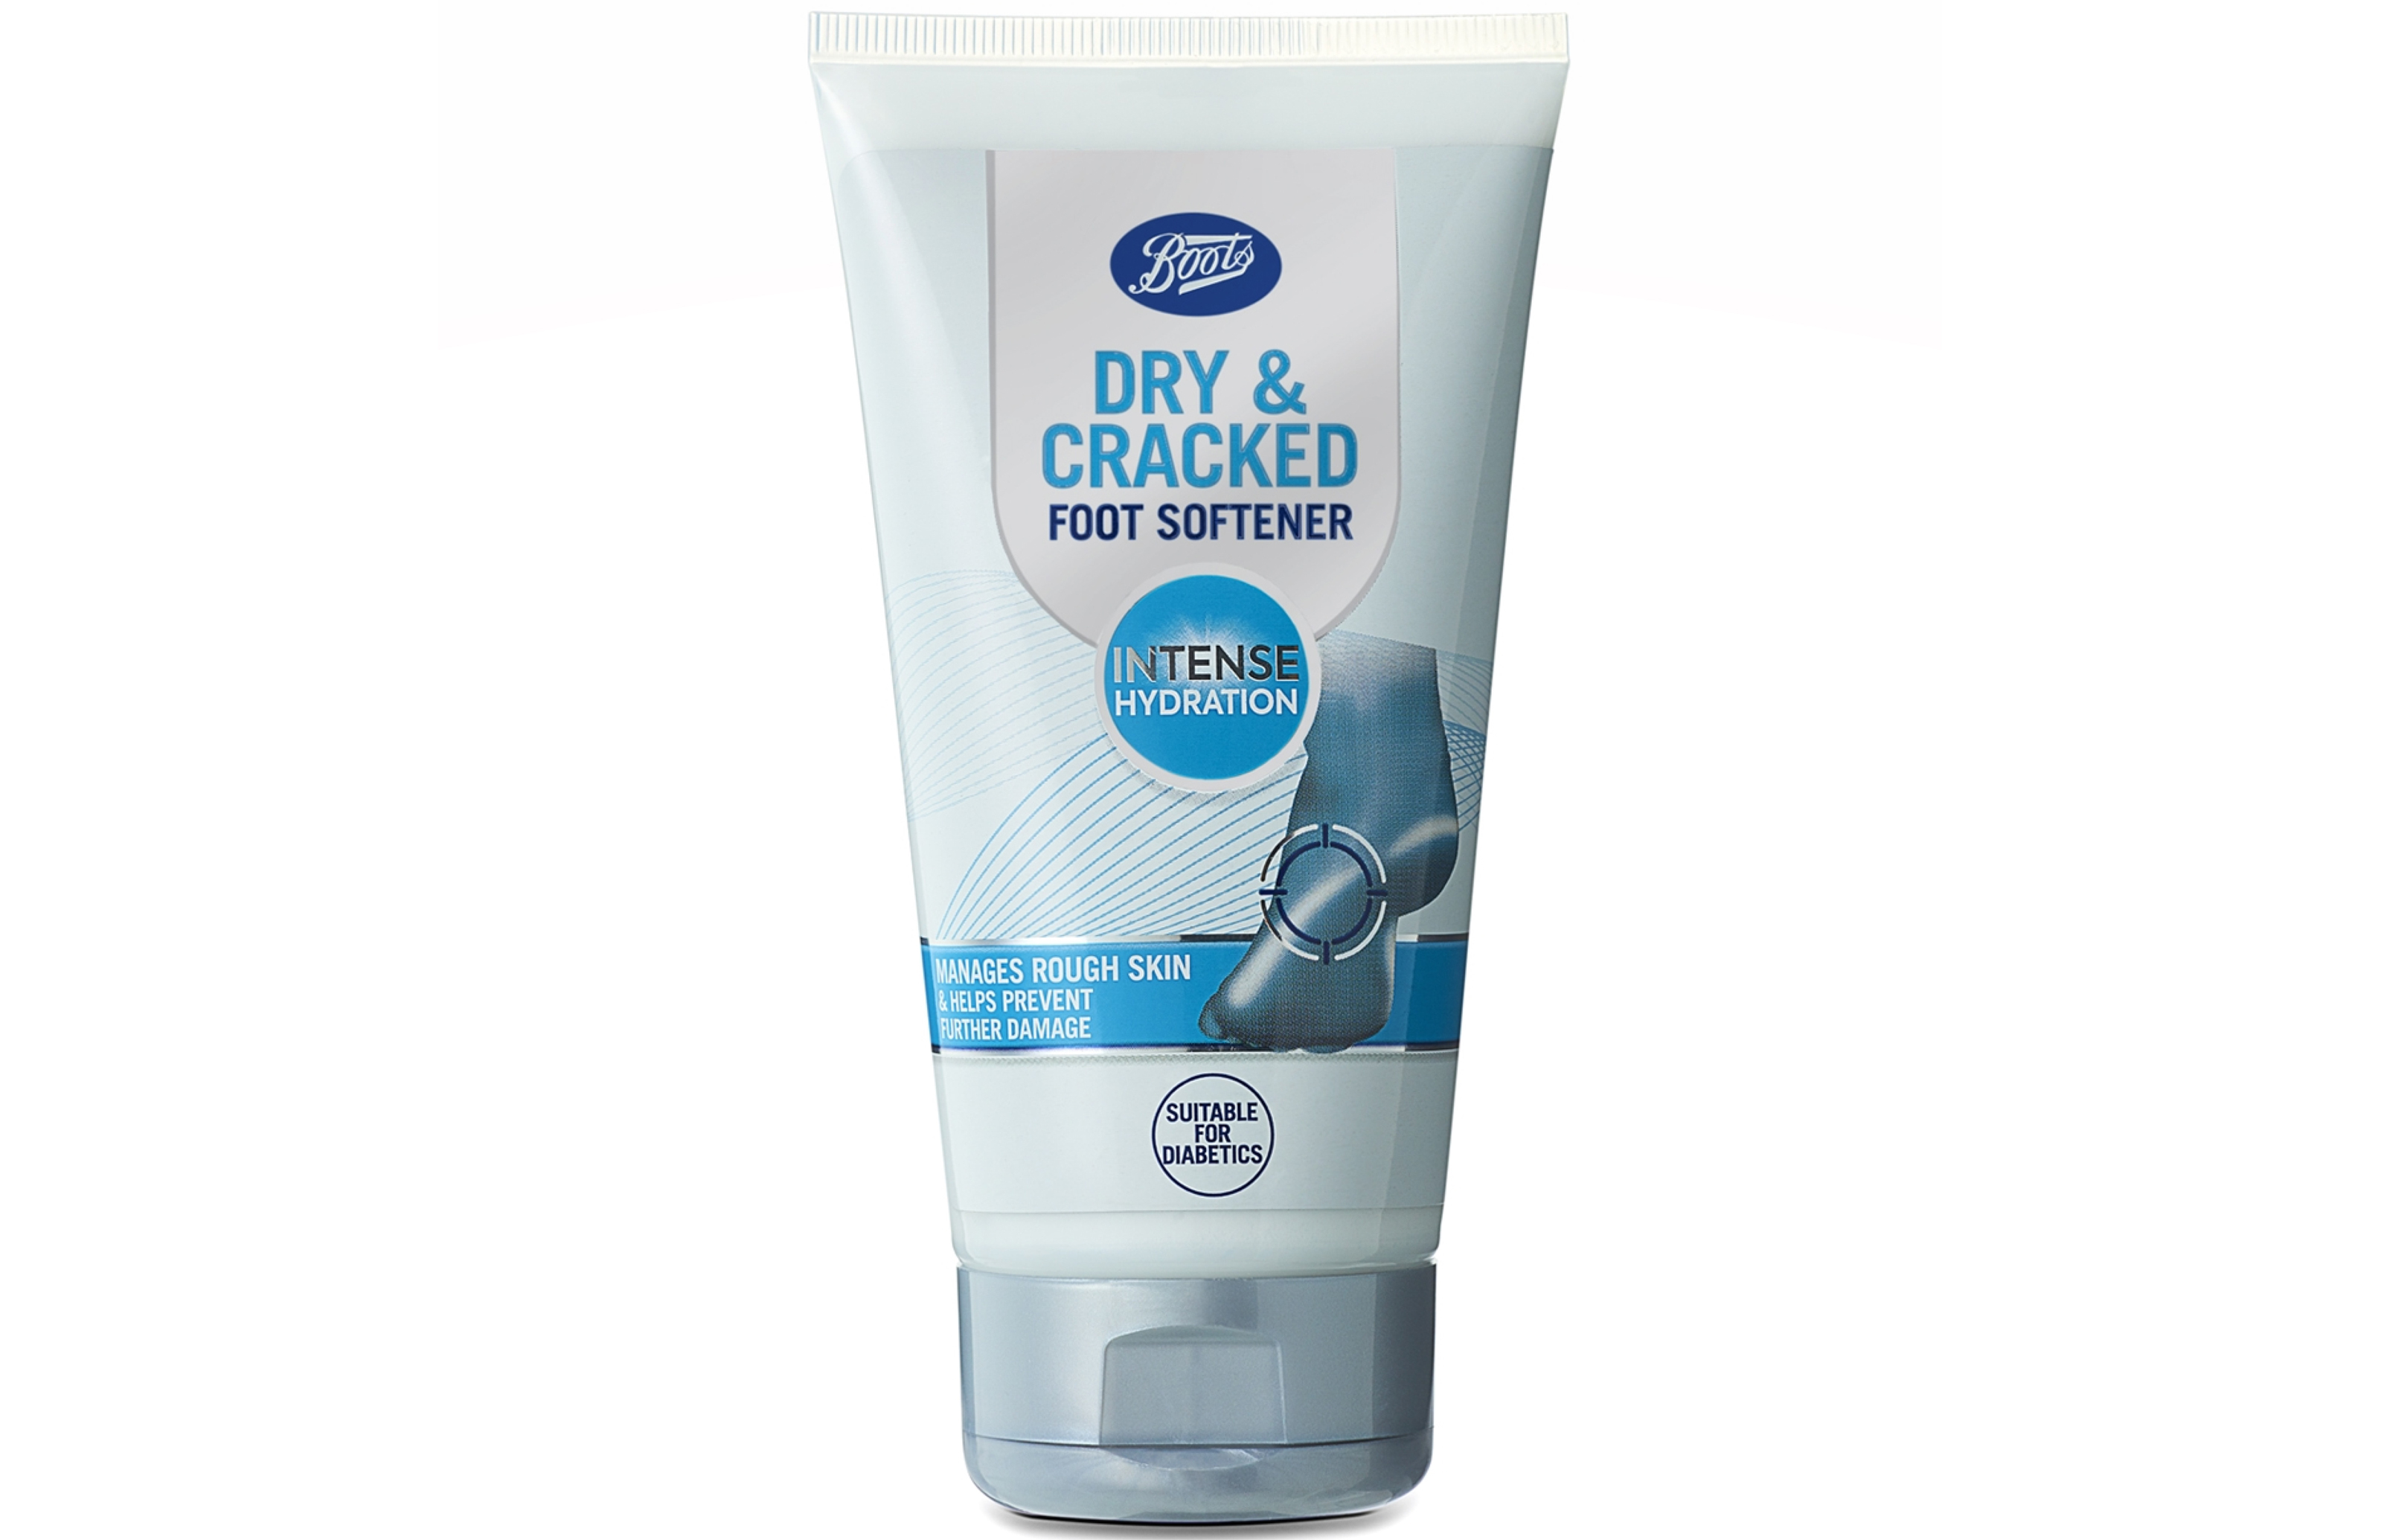 Boots Dry & Cracked Foot Softener, £5.39